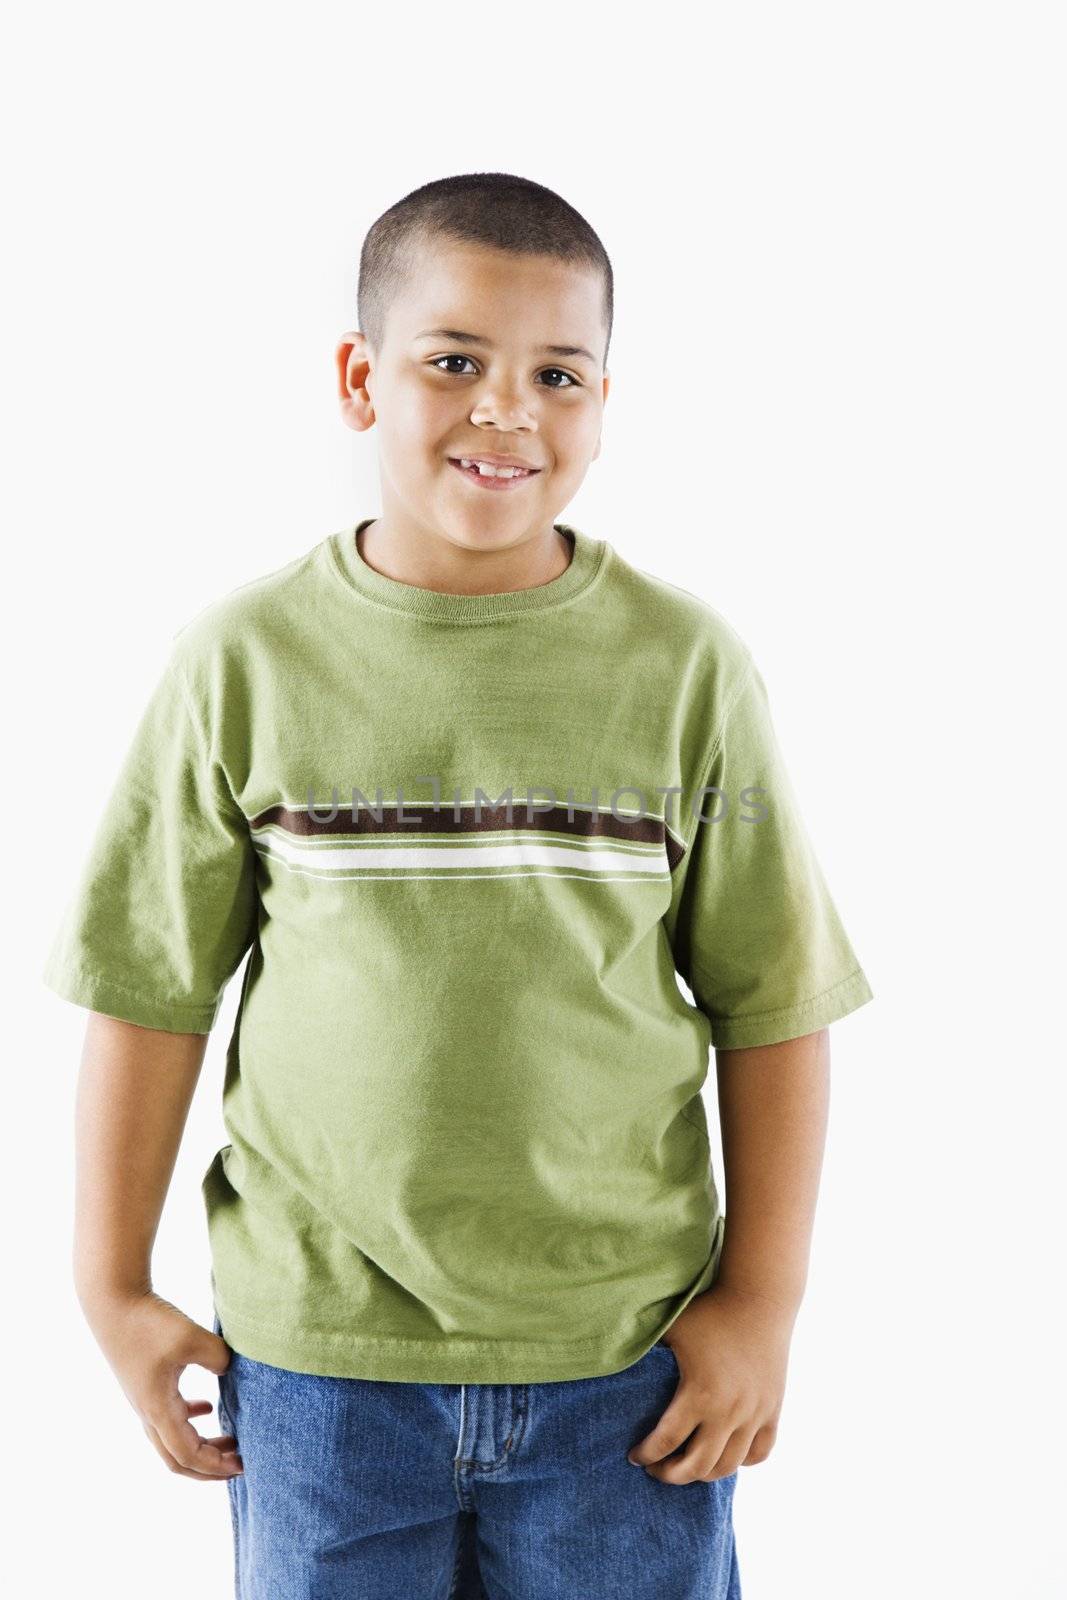 Young latino adolescent boy standing smiling.